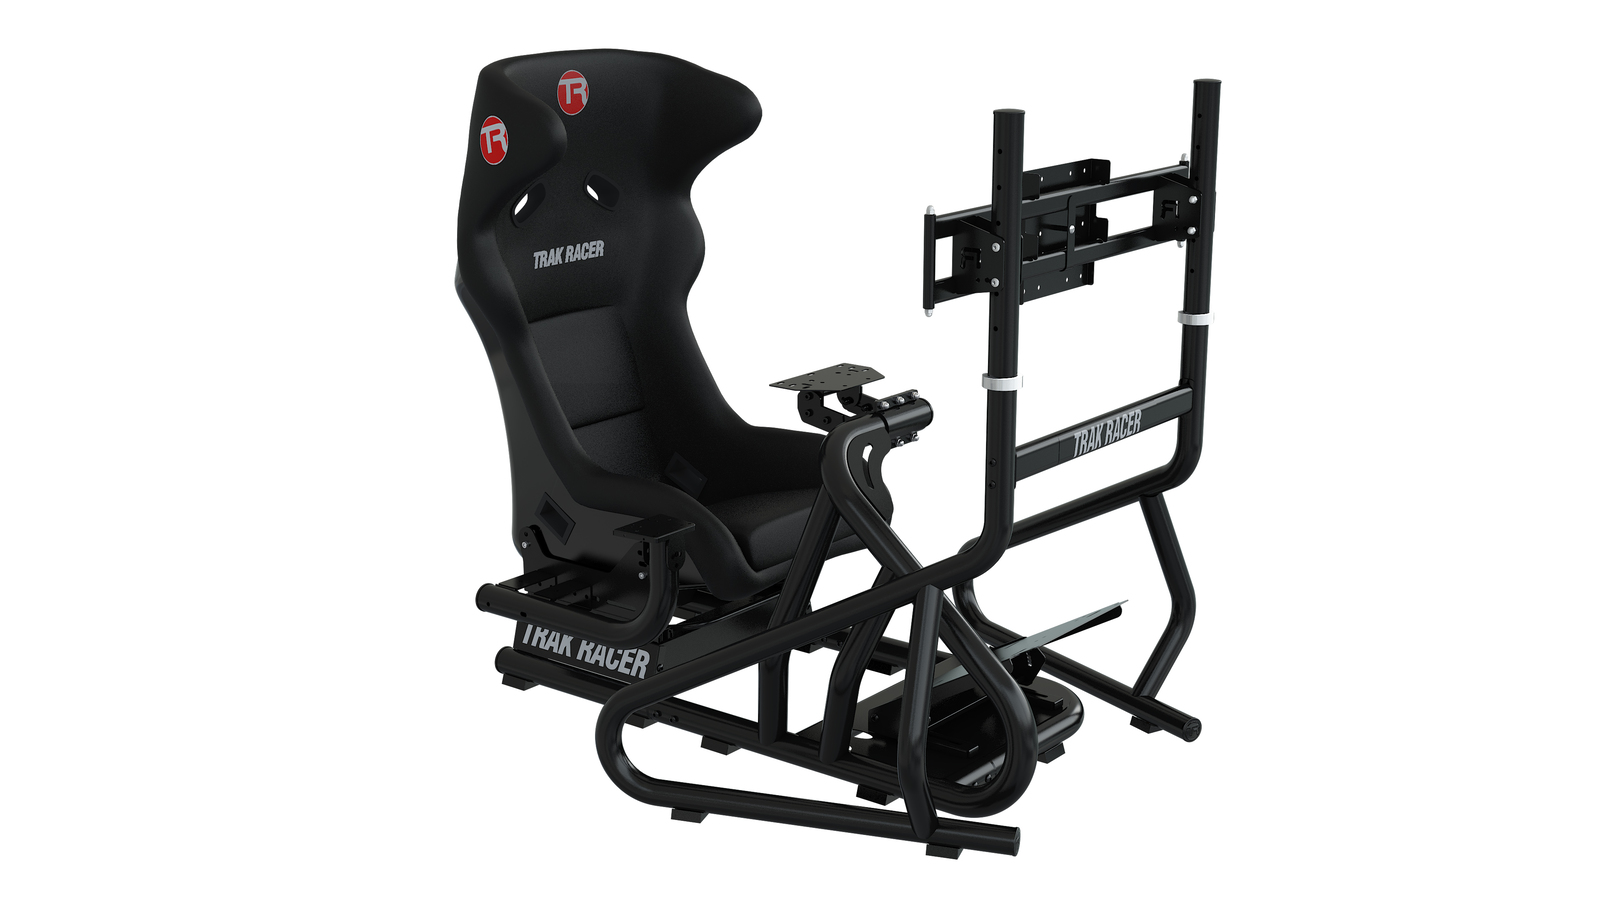 Tv Stand Race Chair Rs6 Cockpit Simulation Seat Gaming Racing